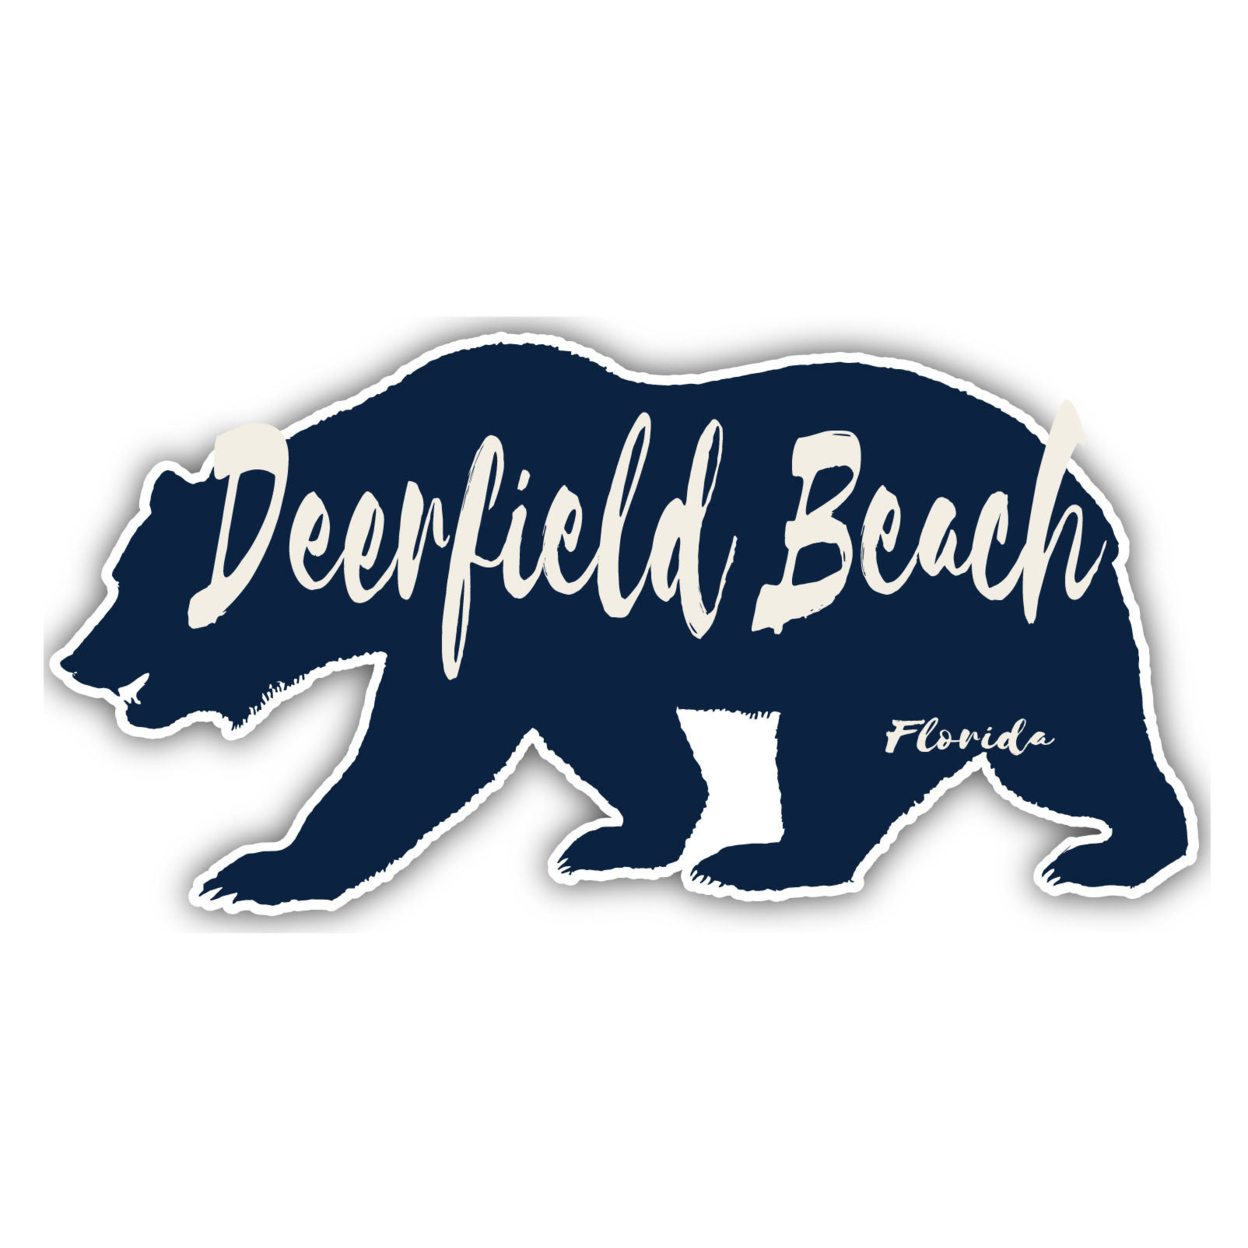 Deerfield Beach Florida Souvenir Decorative Stickers (Choose Theme And Size) - Single Unit, 10-Inch, Great Outdoors